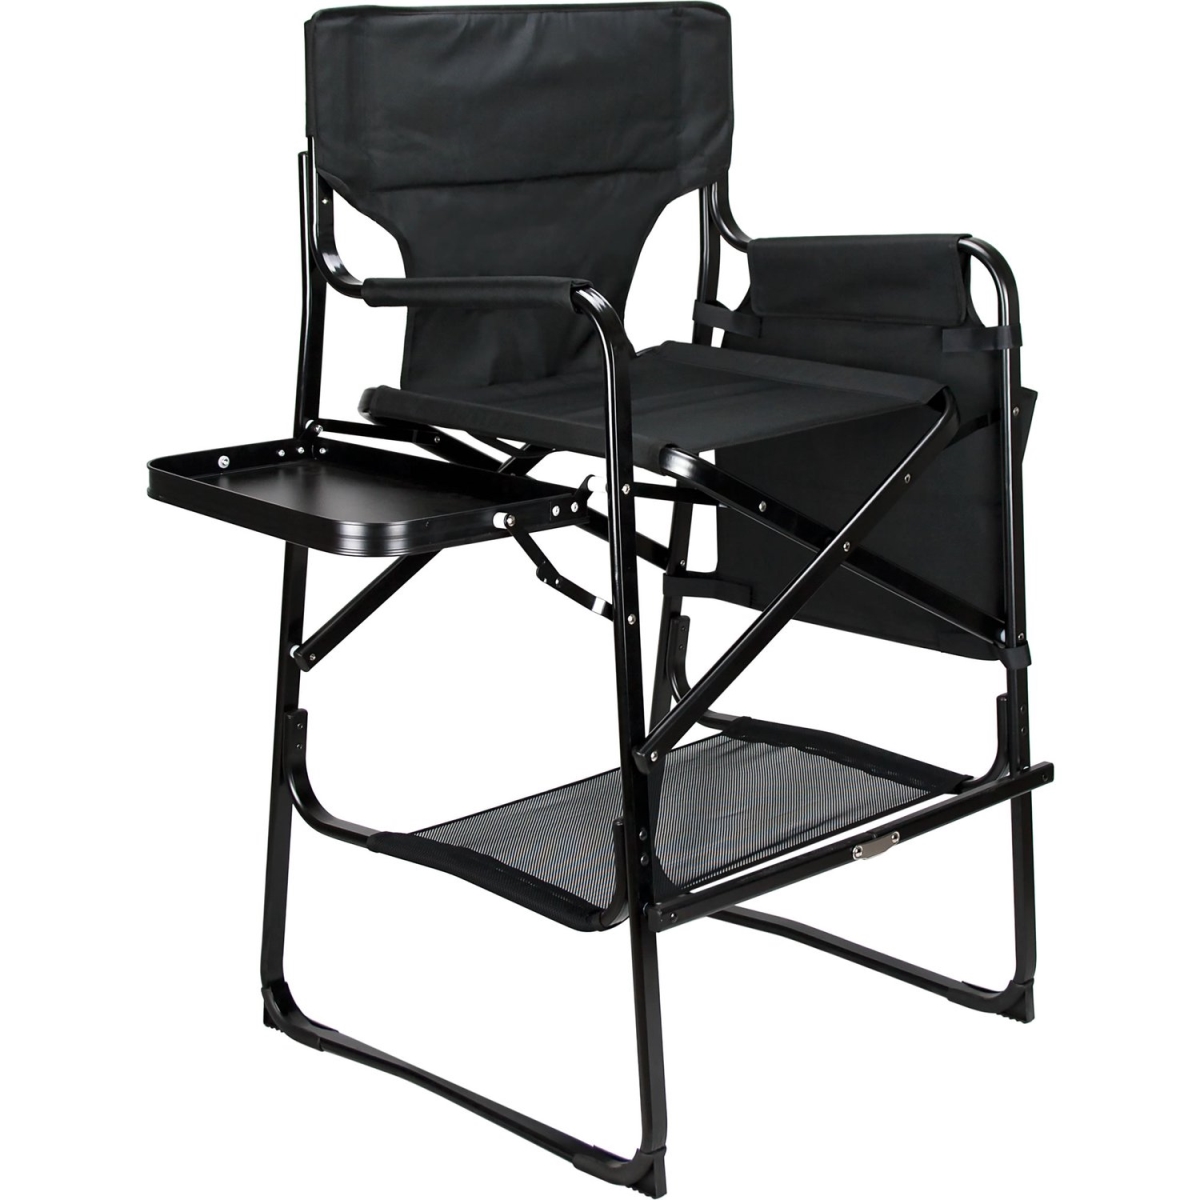 Vch002-102 Black Tall Aluminum Director Chair With Table Tray & Pockets Storage